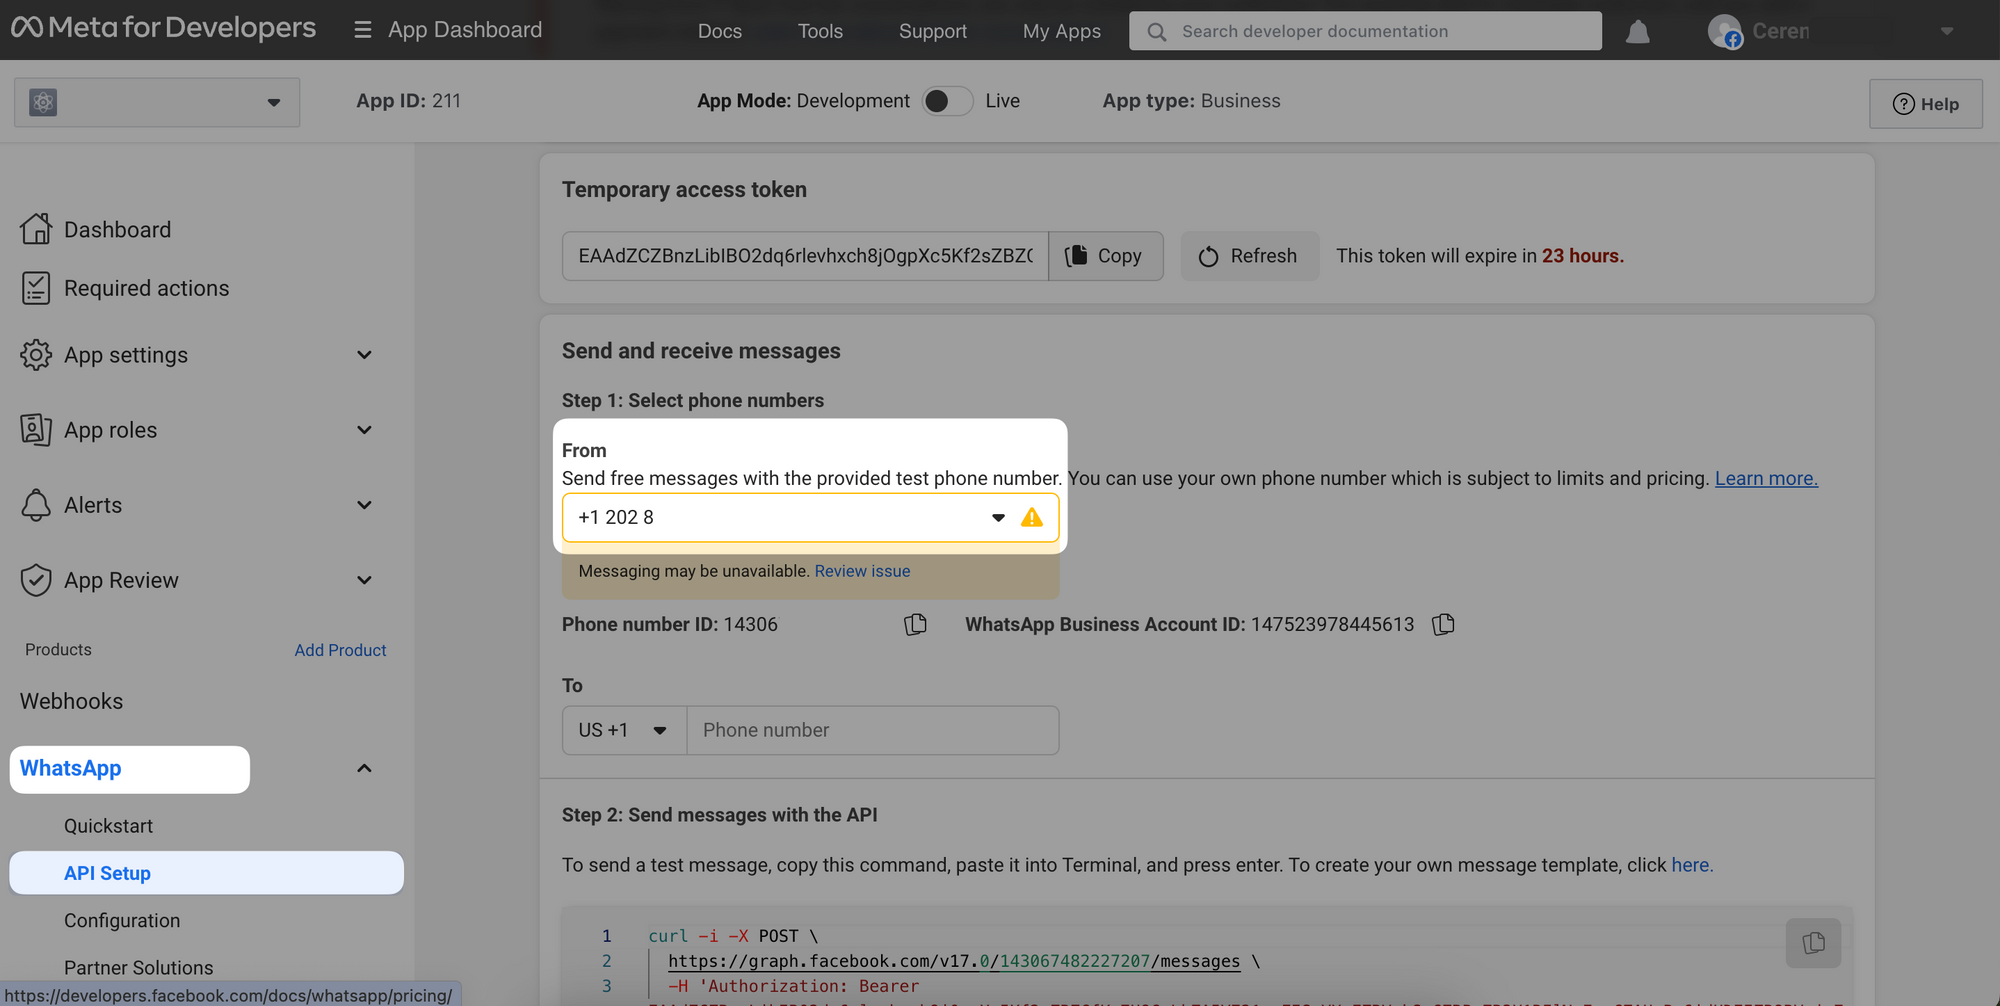 Getting the phone number from part in WhatApp API Setup section in Meta for Developers